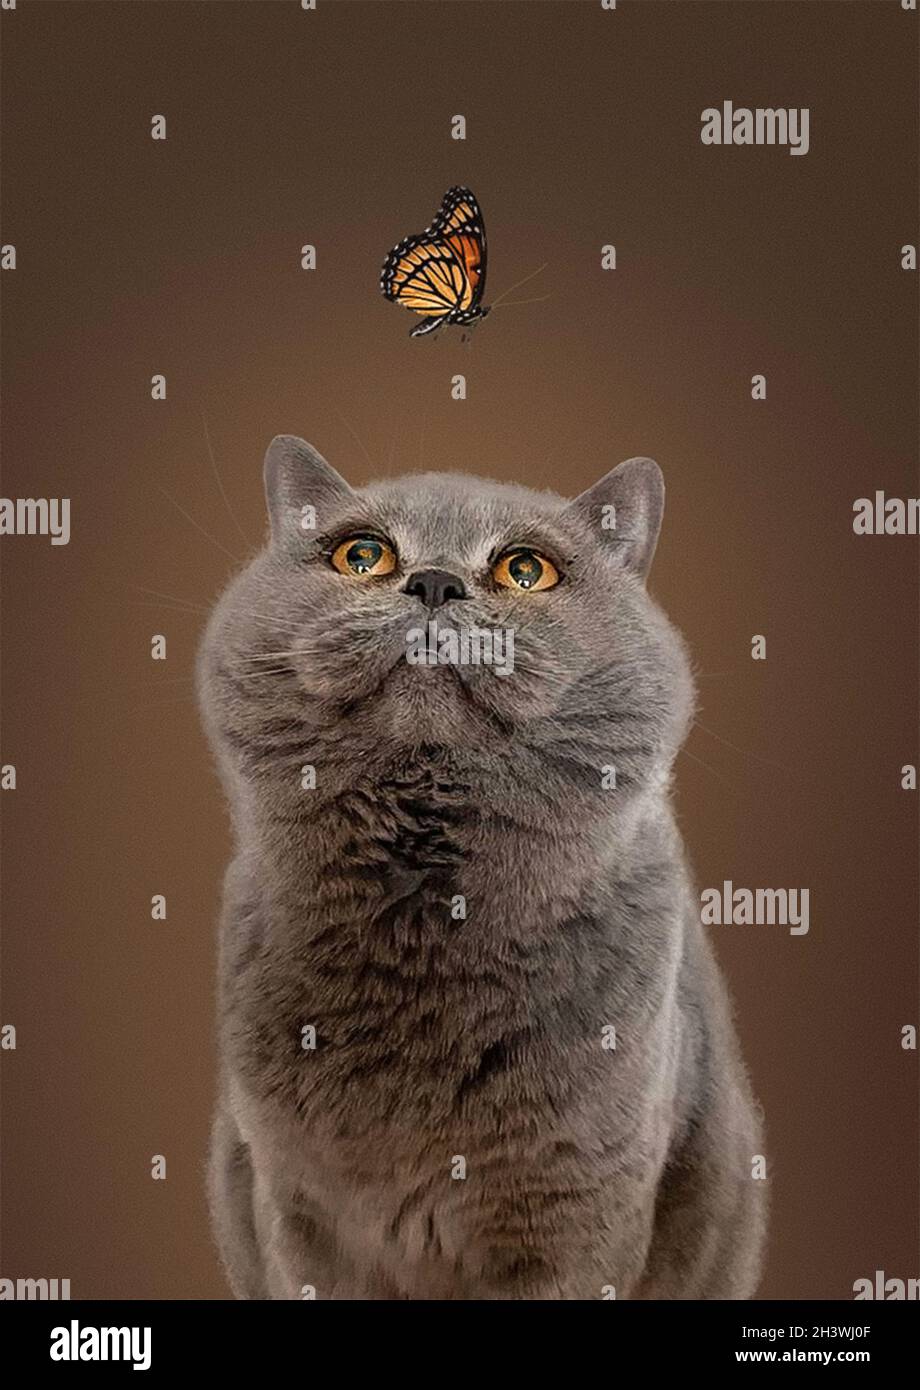 Image of a Chartreux cat looking for a butterfly flying over her head on a warm background Stock Photo